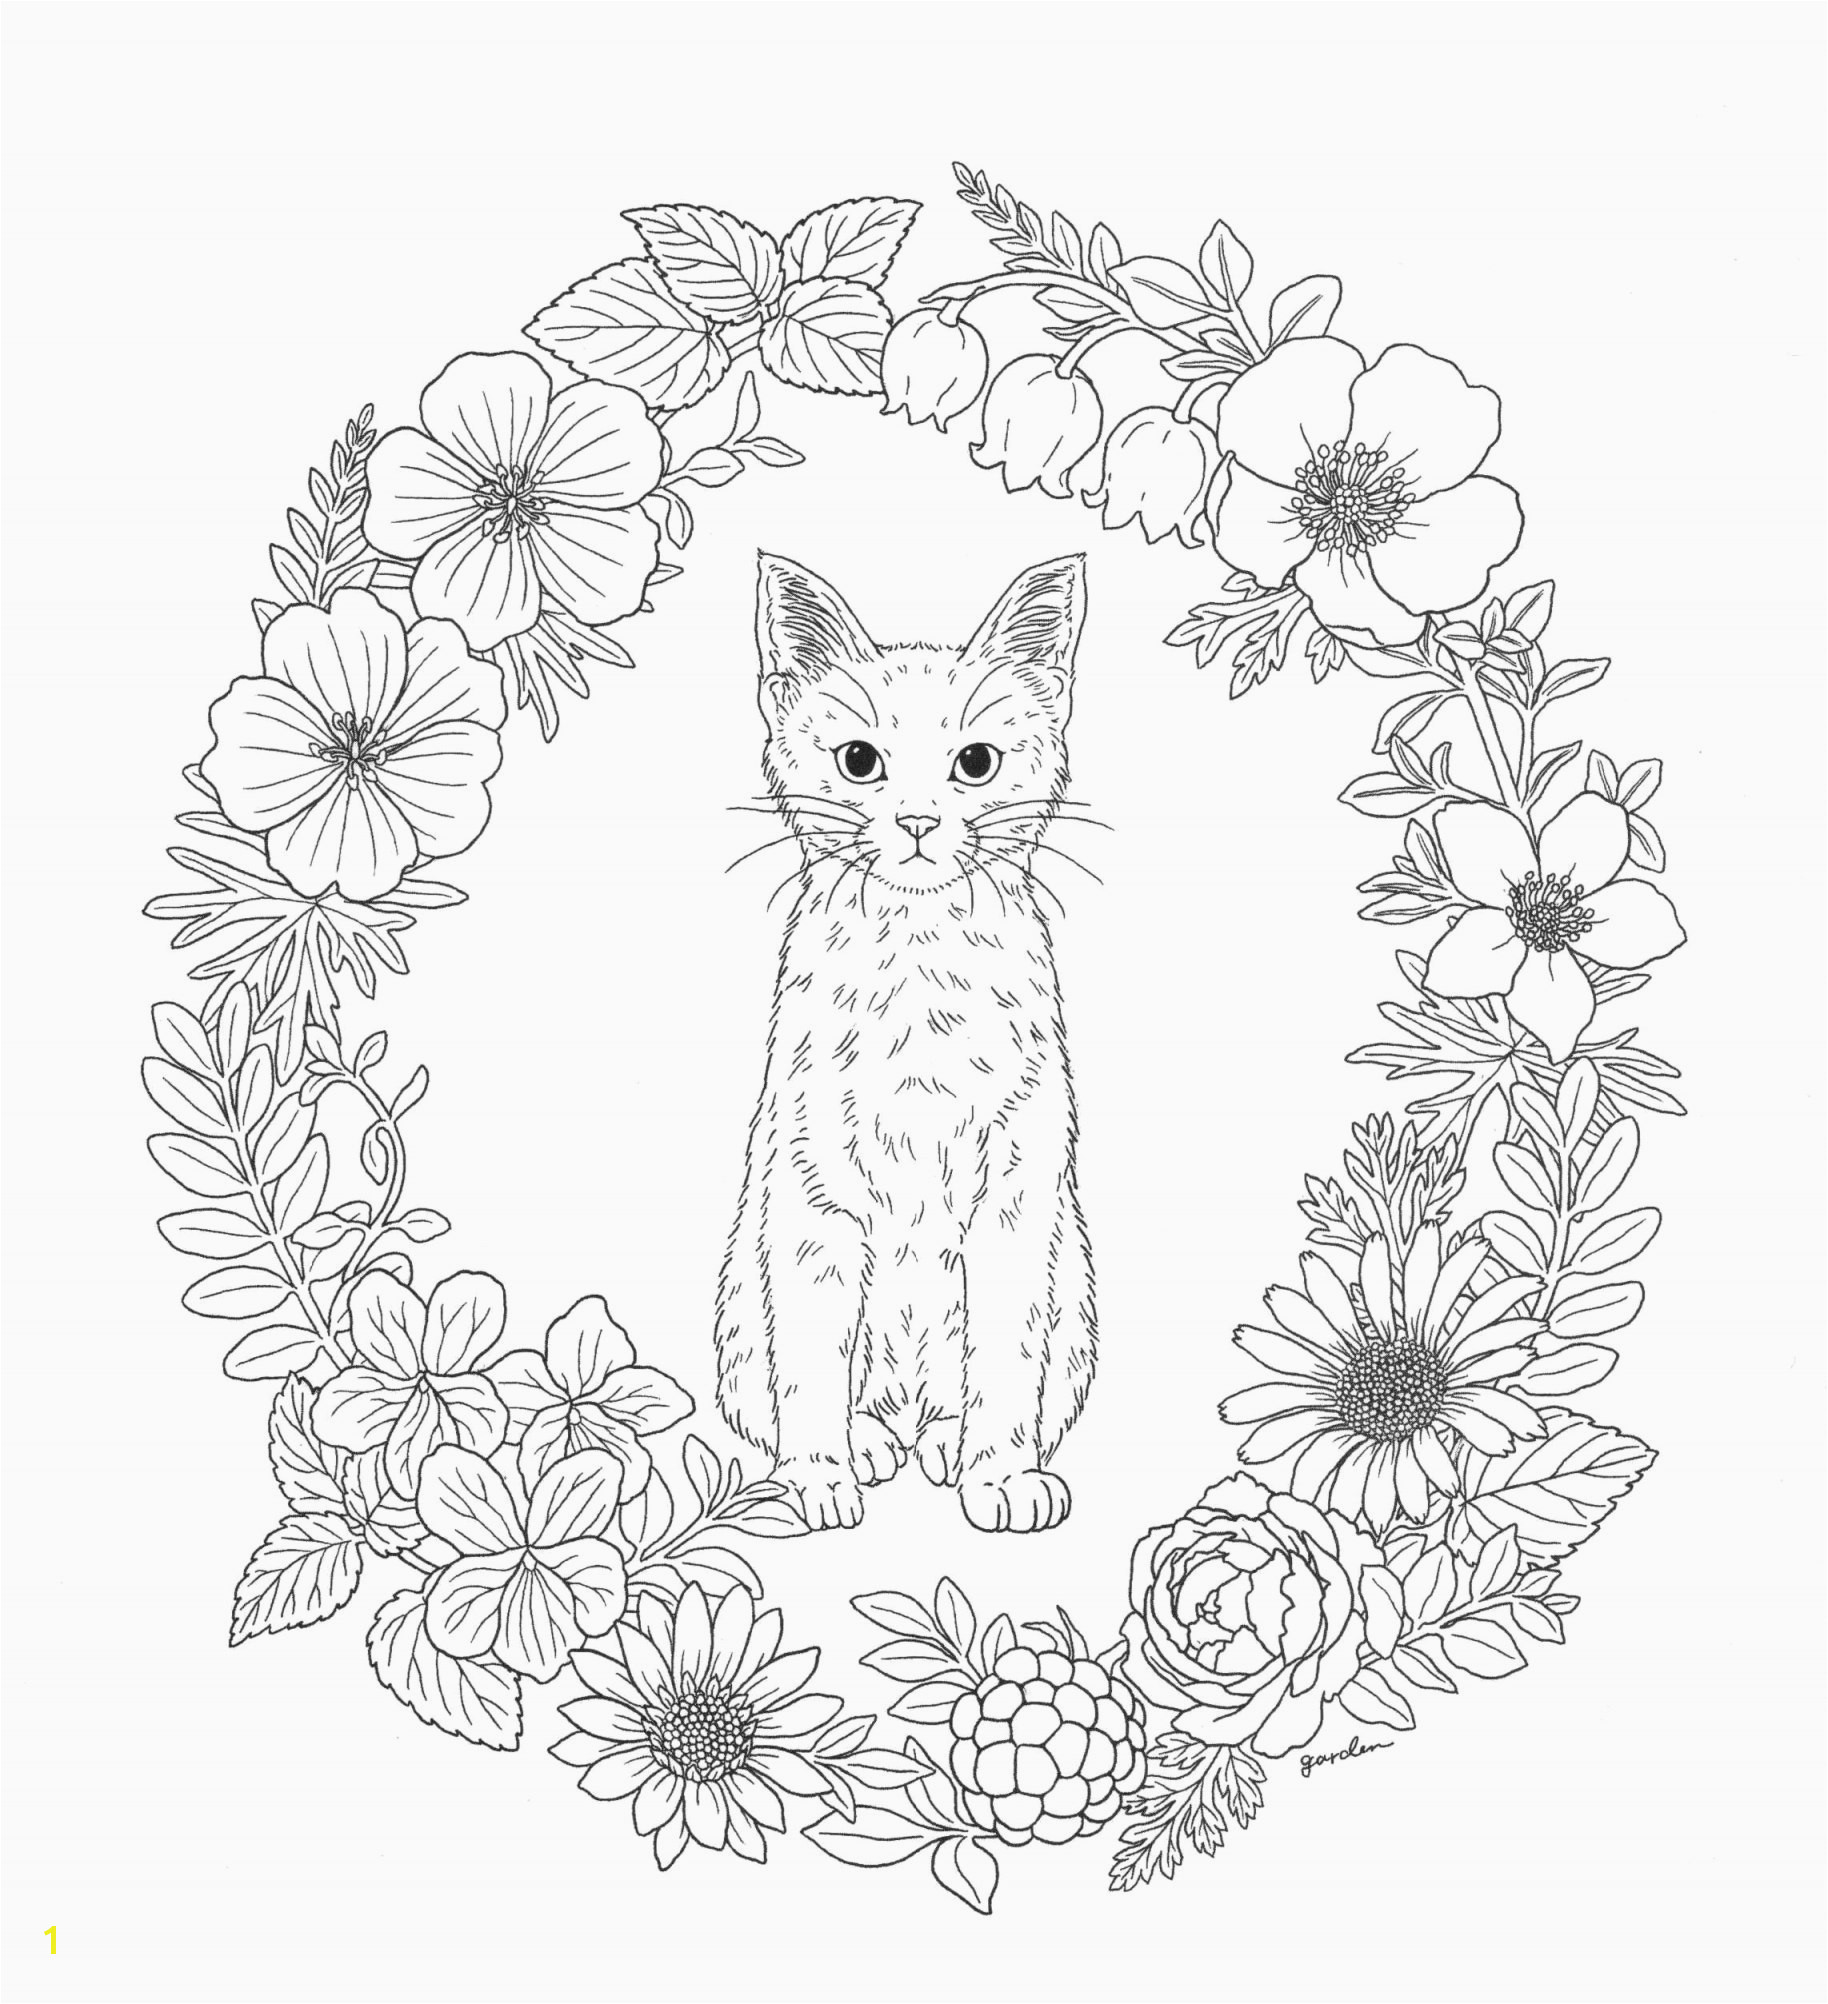 Coloring Pages for Girls 12 and Up Christmas Coloring Pictures for Adults Archives Coloring Pages for